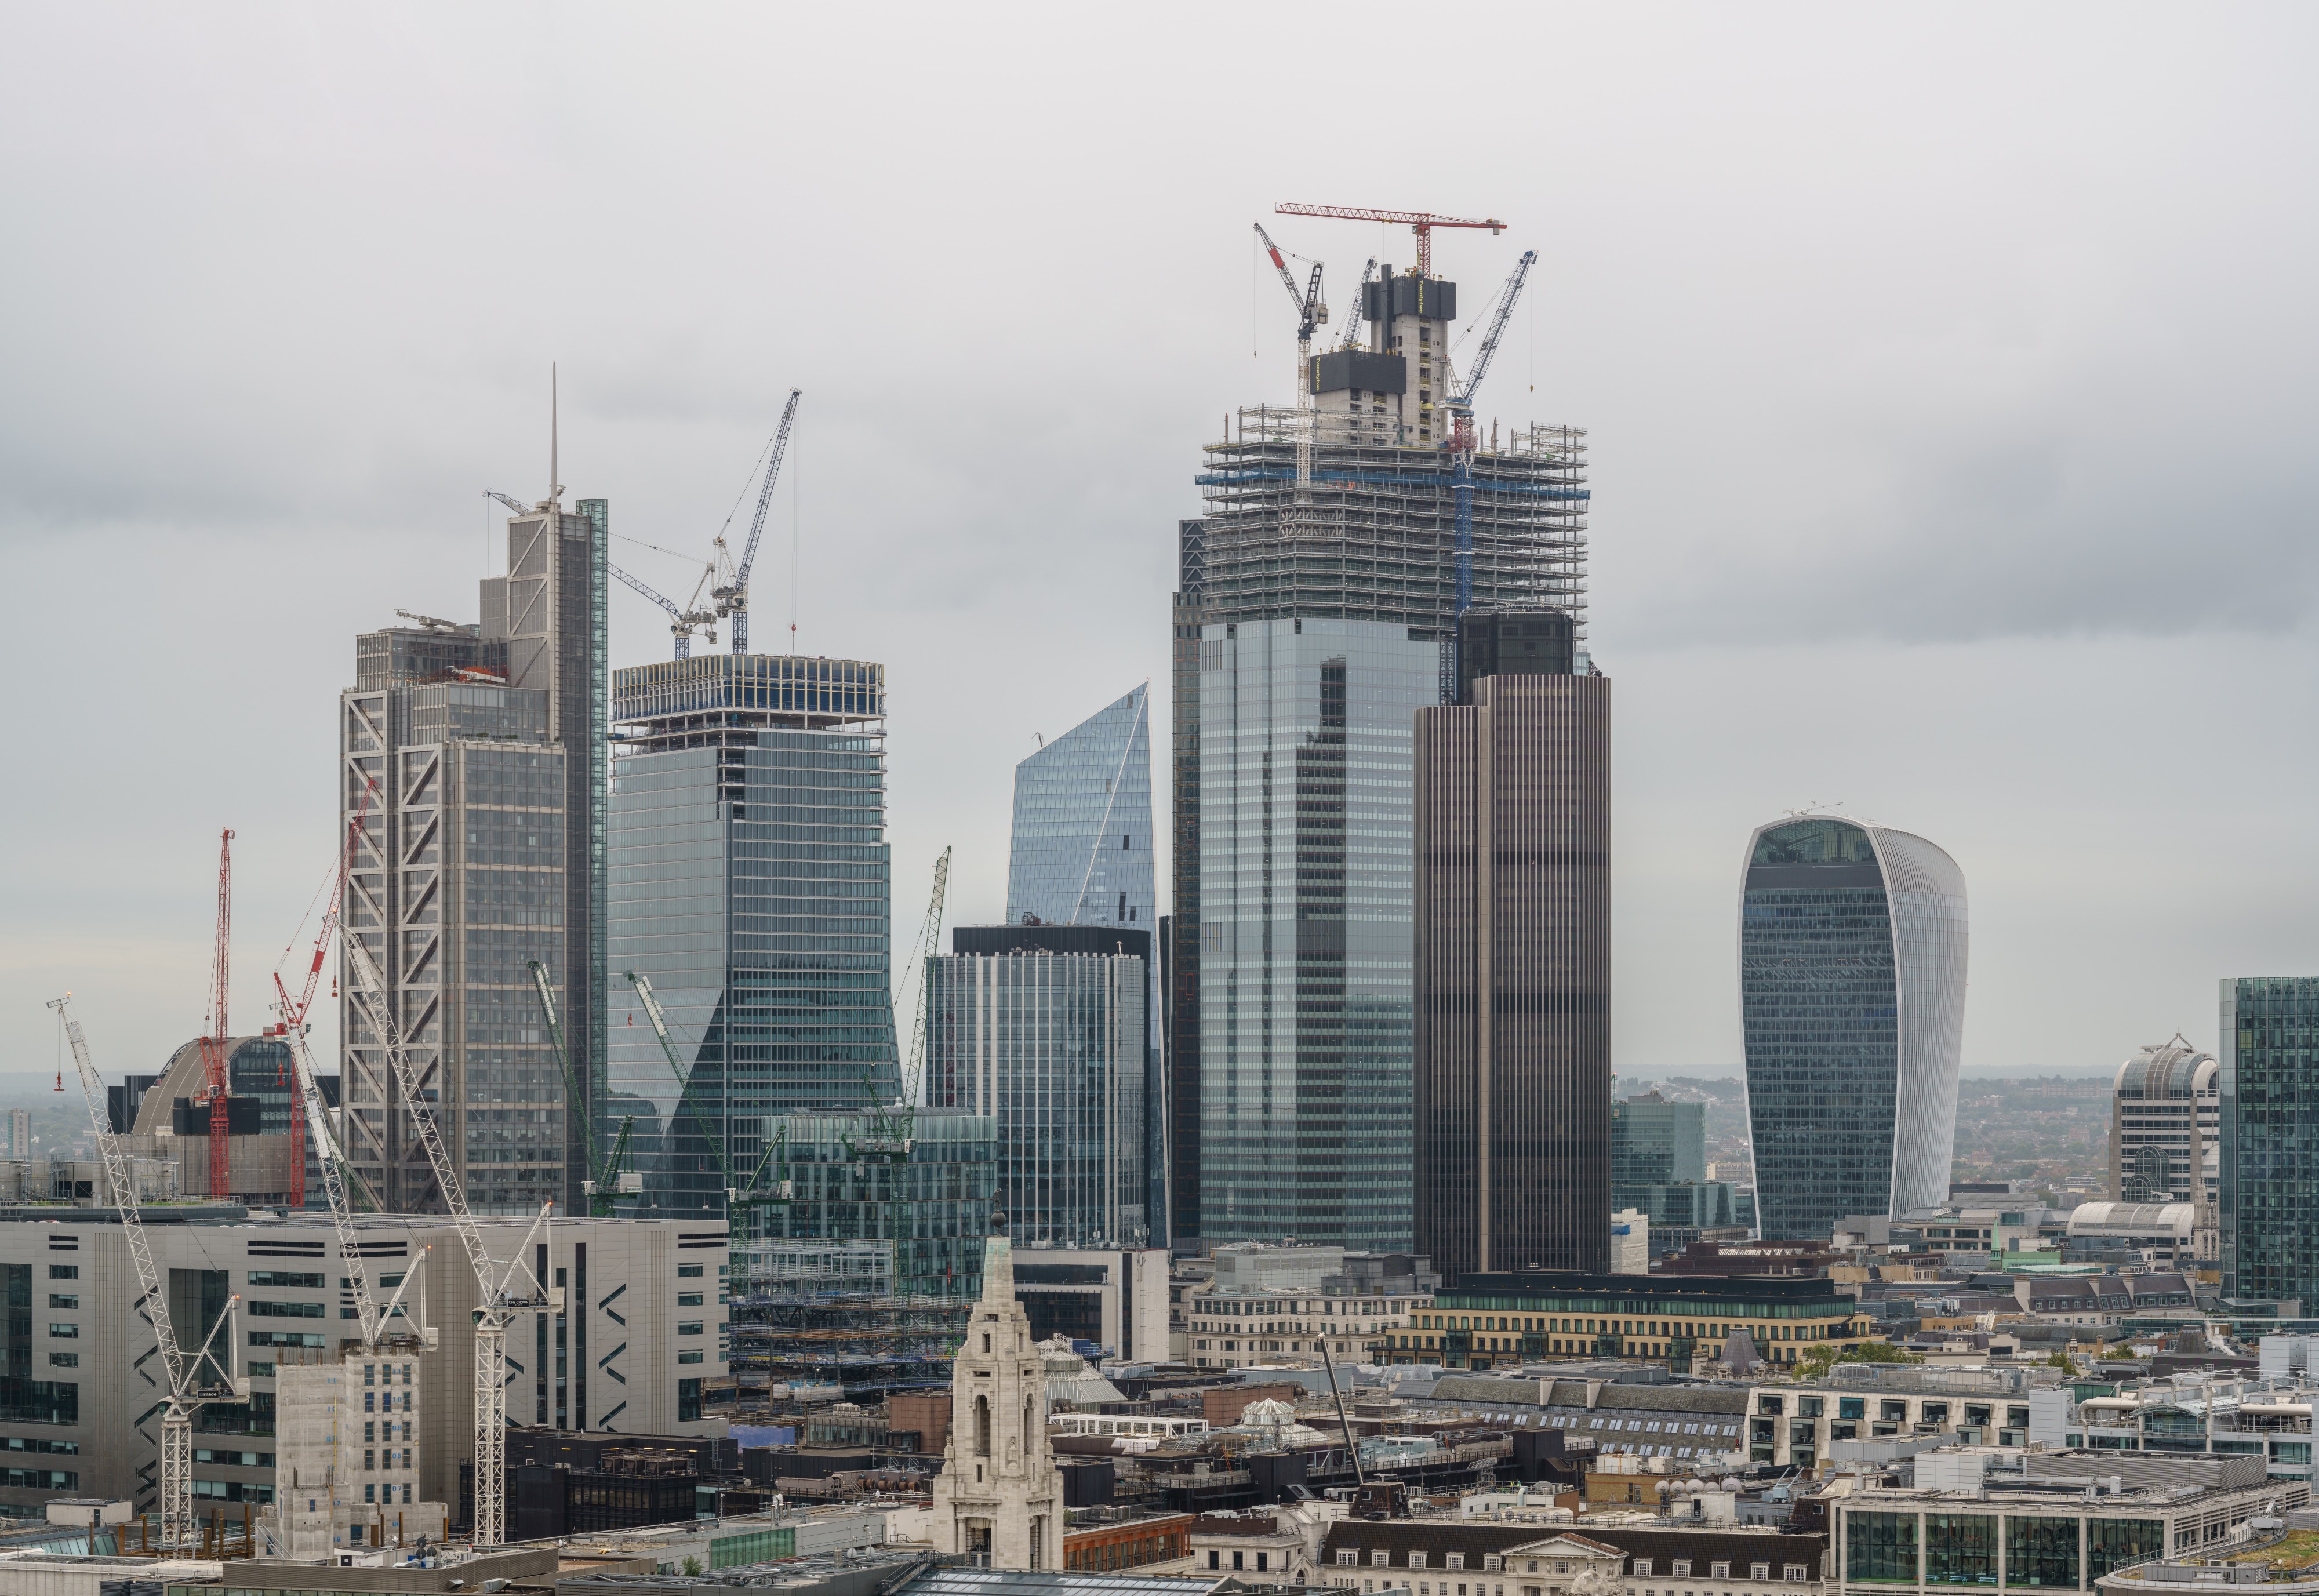 City of London skyscrapers from the terrace of the White Collar Factory, Old Street, 2018-09-22